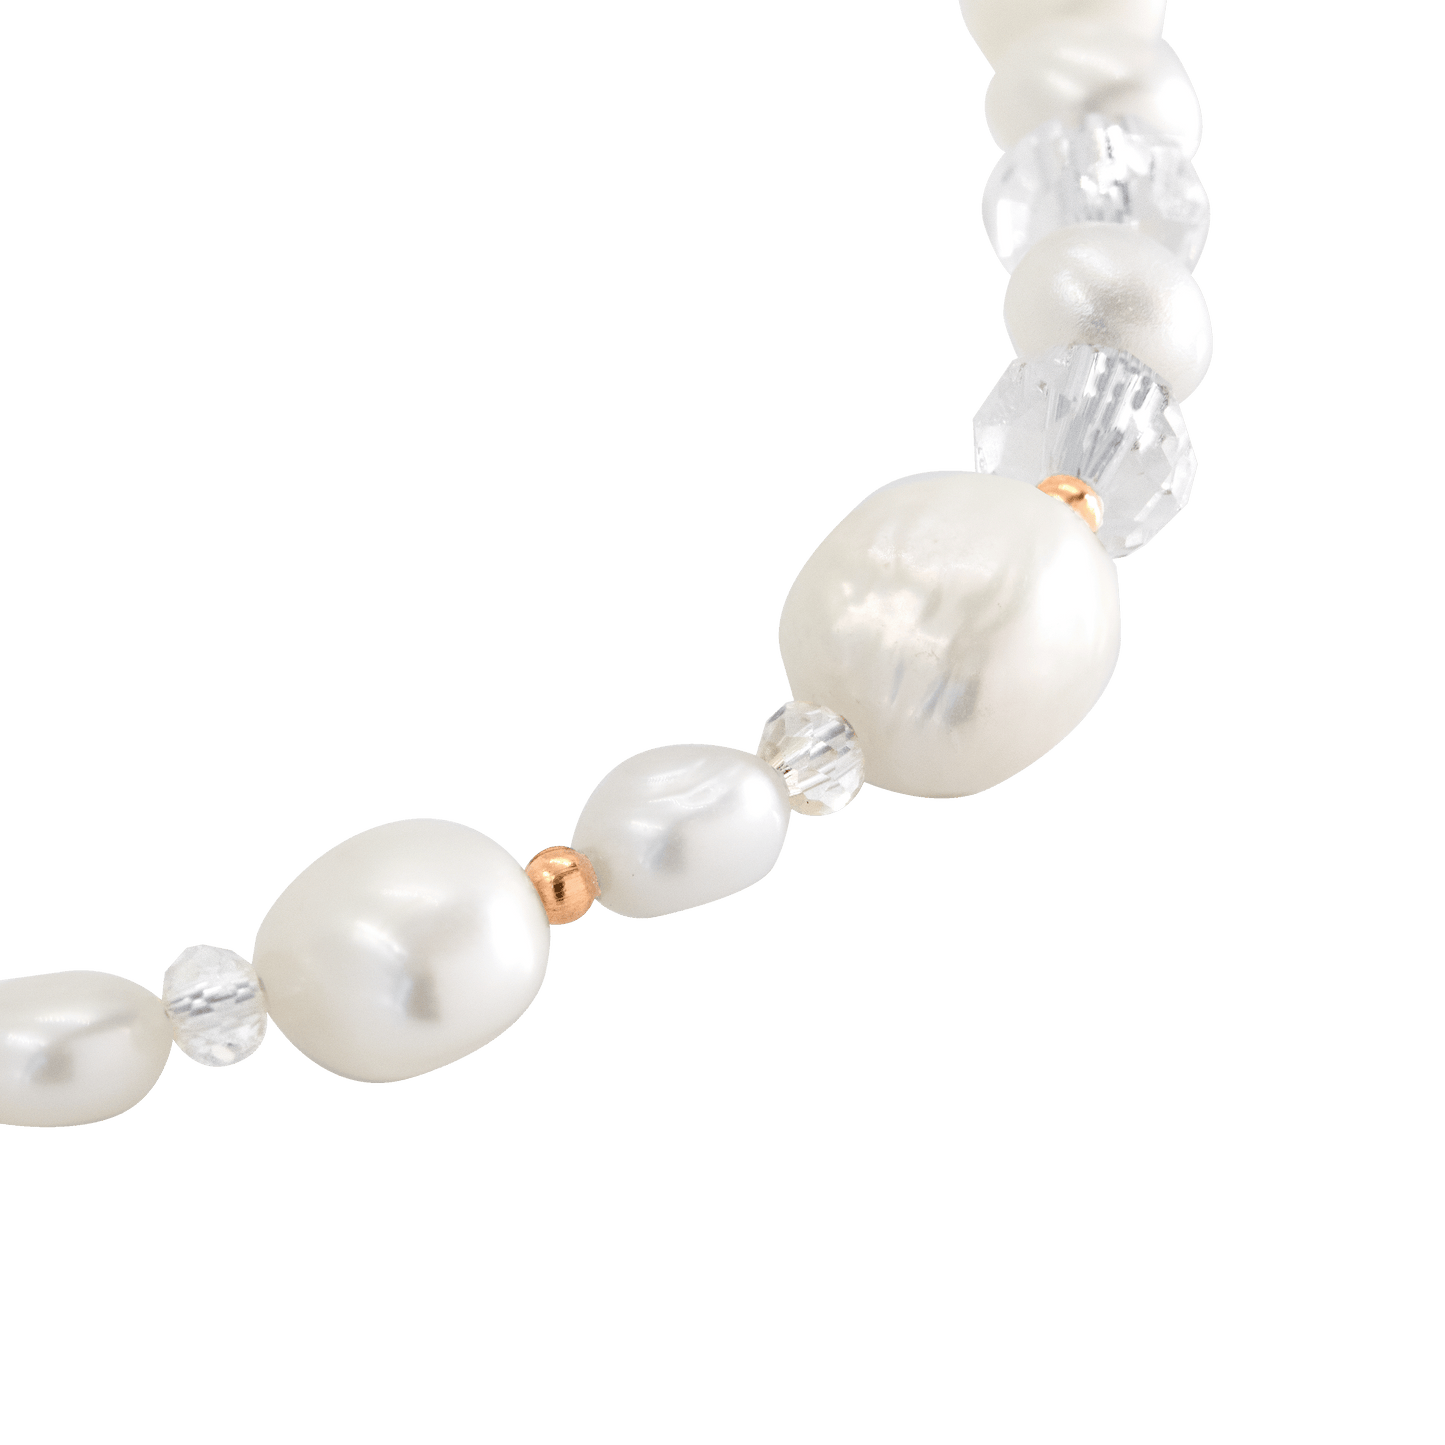 Icy Cool Pearl Necklace Roségold